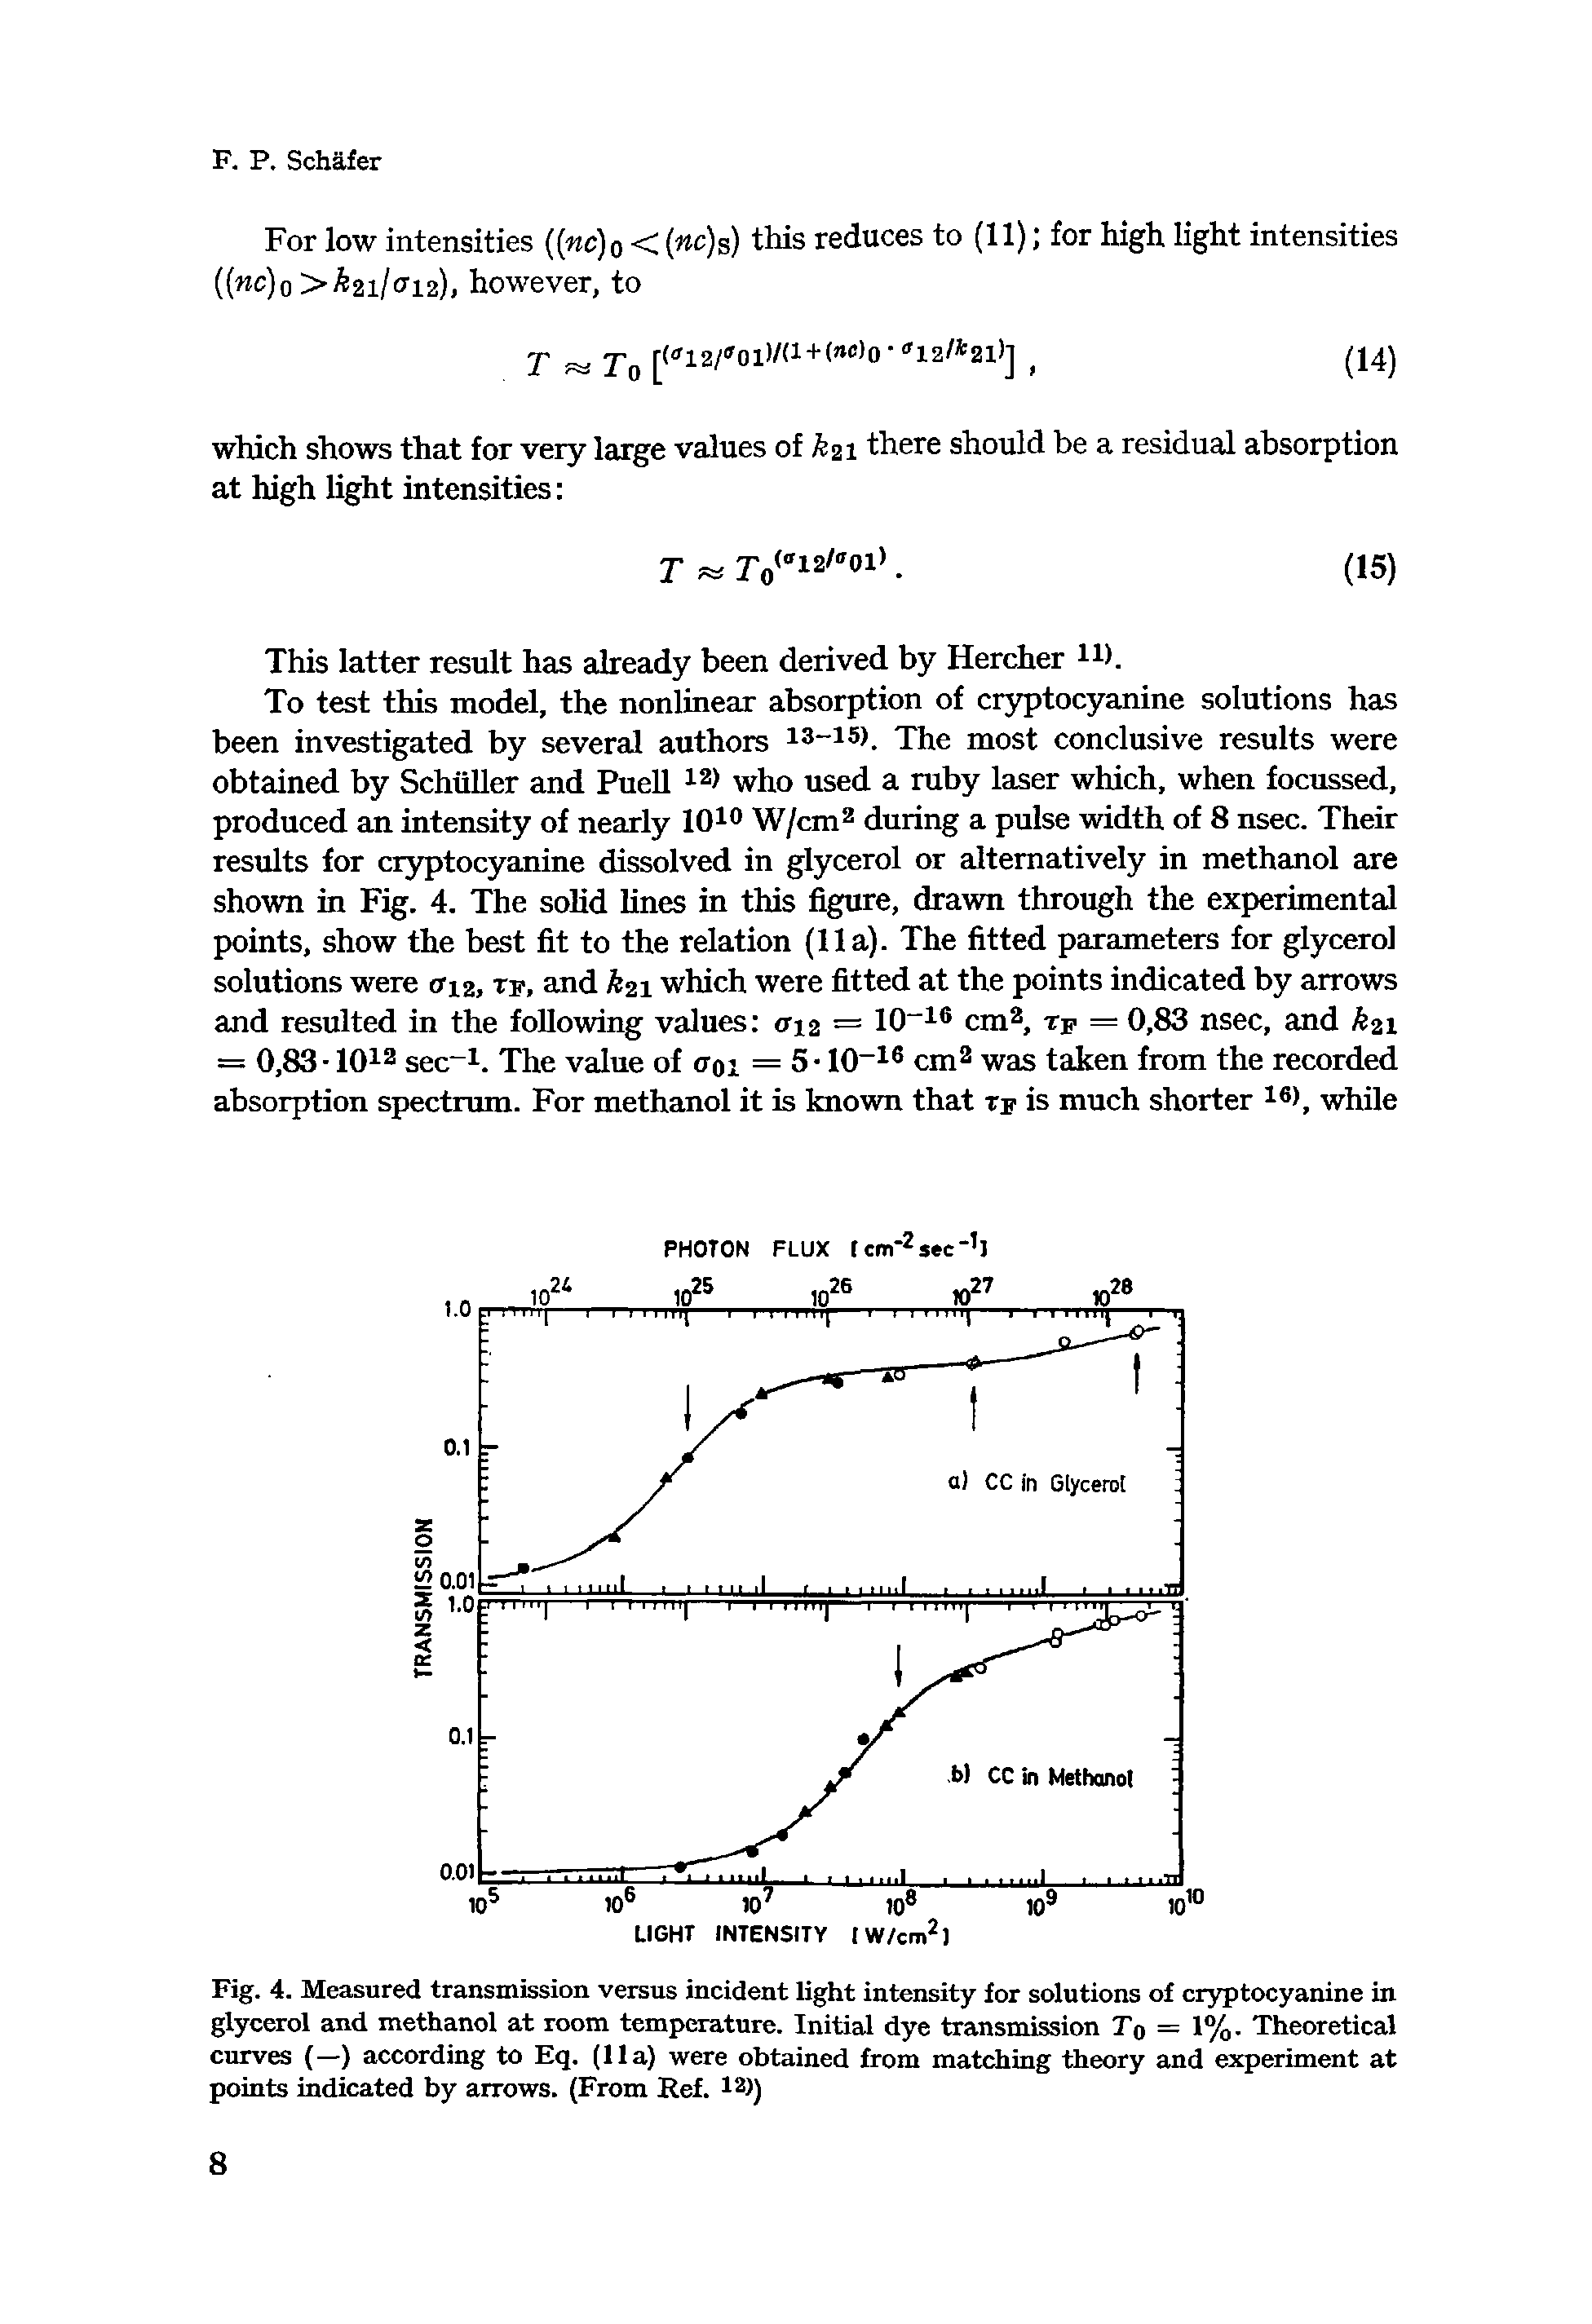 Fig. 4. Measured transmission versus incident light intensity for solutions of cryptocyanine in glycerol and methanol at room temperature. Initial dye transmission T0 = 1%. Theoretical curves (—) according to Eq. (11a) were obtained from matching theory and experiment at points indicated by arrows. (From Ref. 12))...